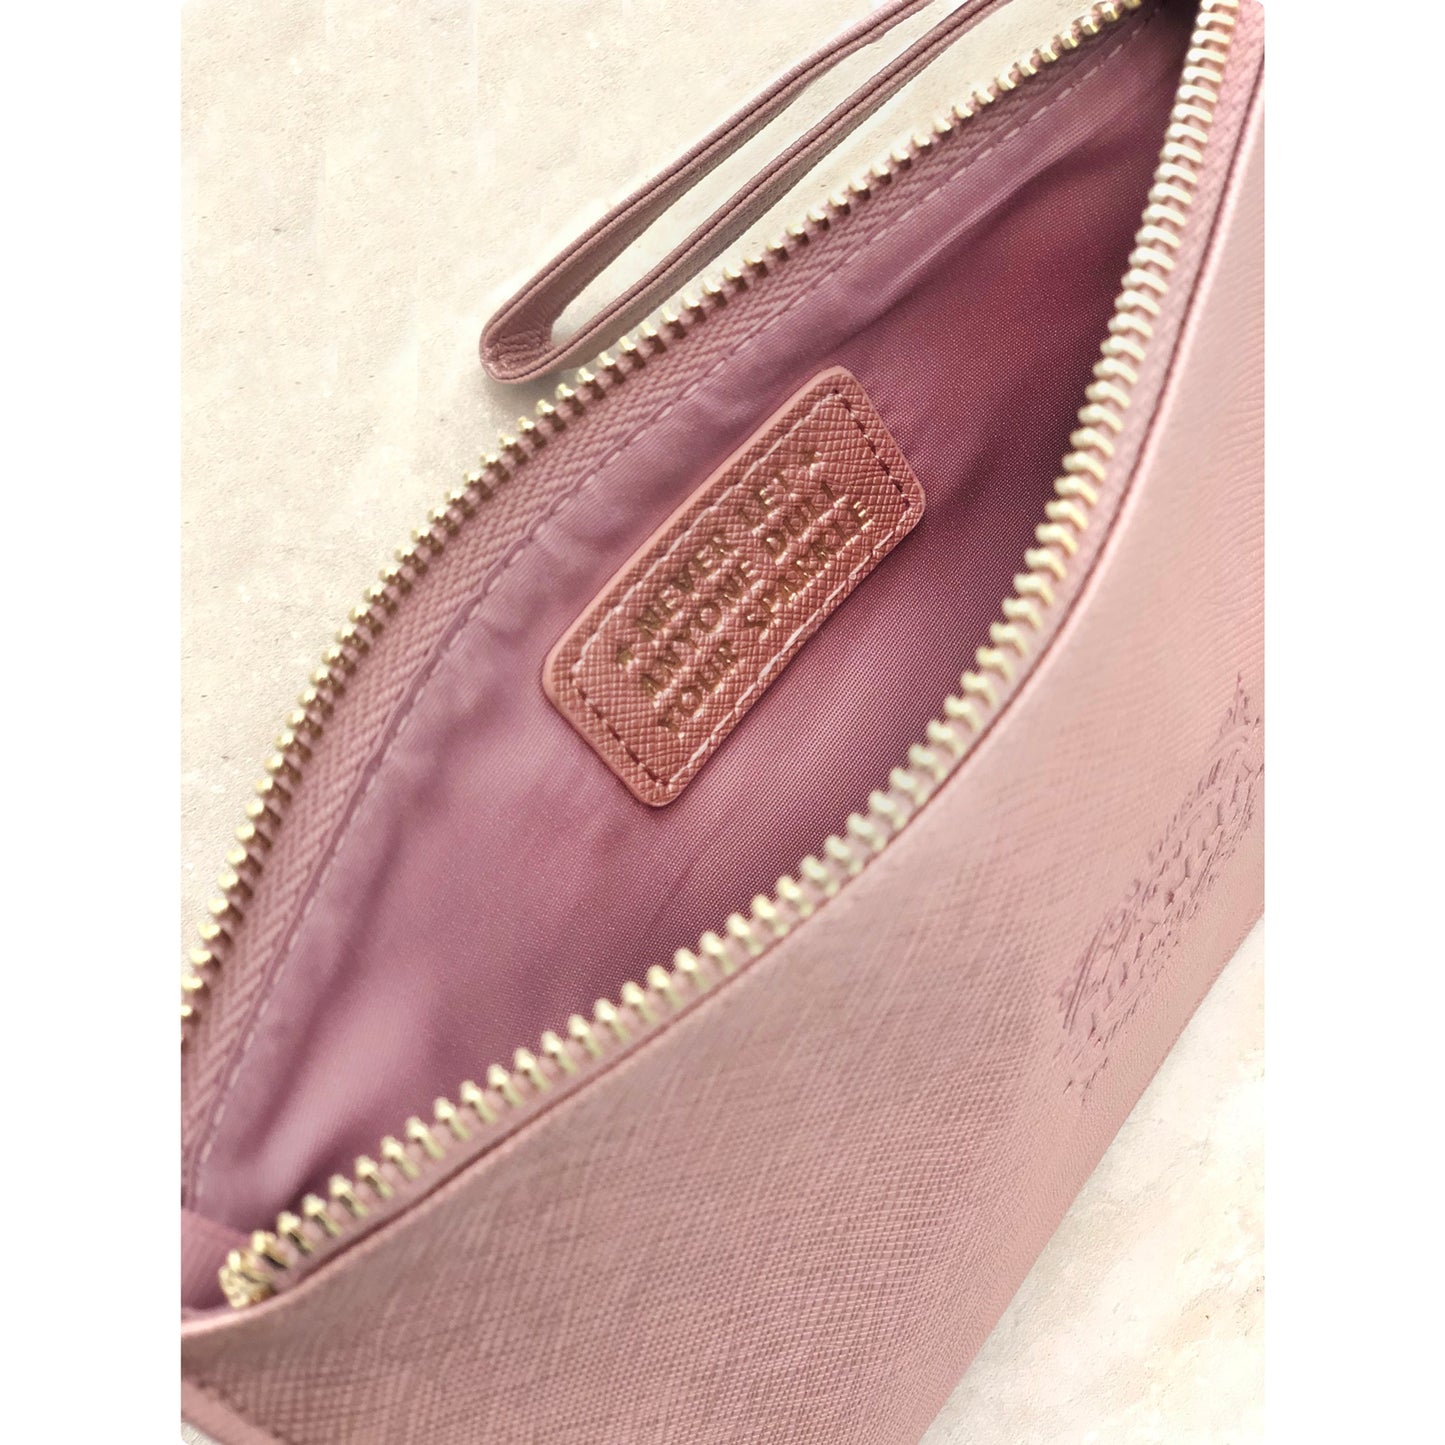 Clutch Bag With Handle & Embossed Text "Lisa"